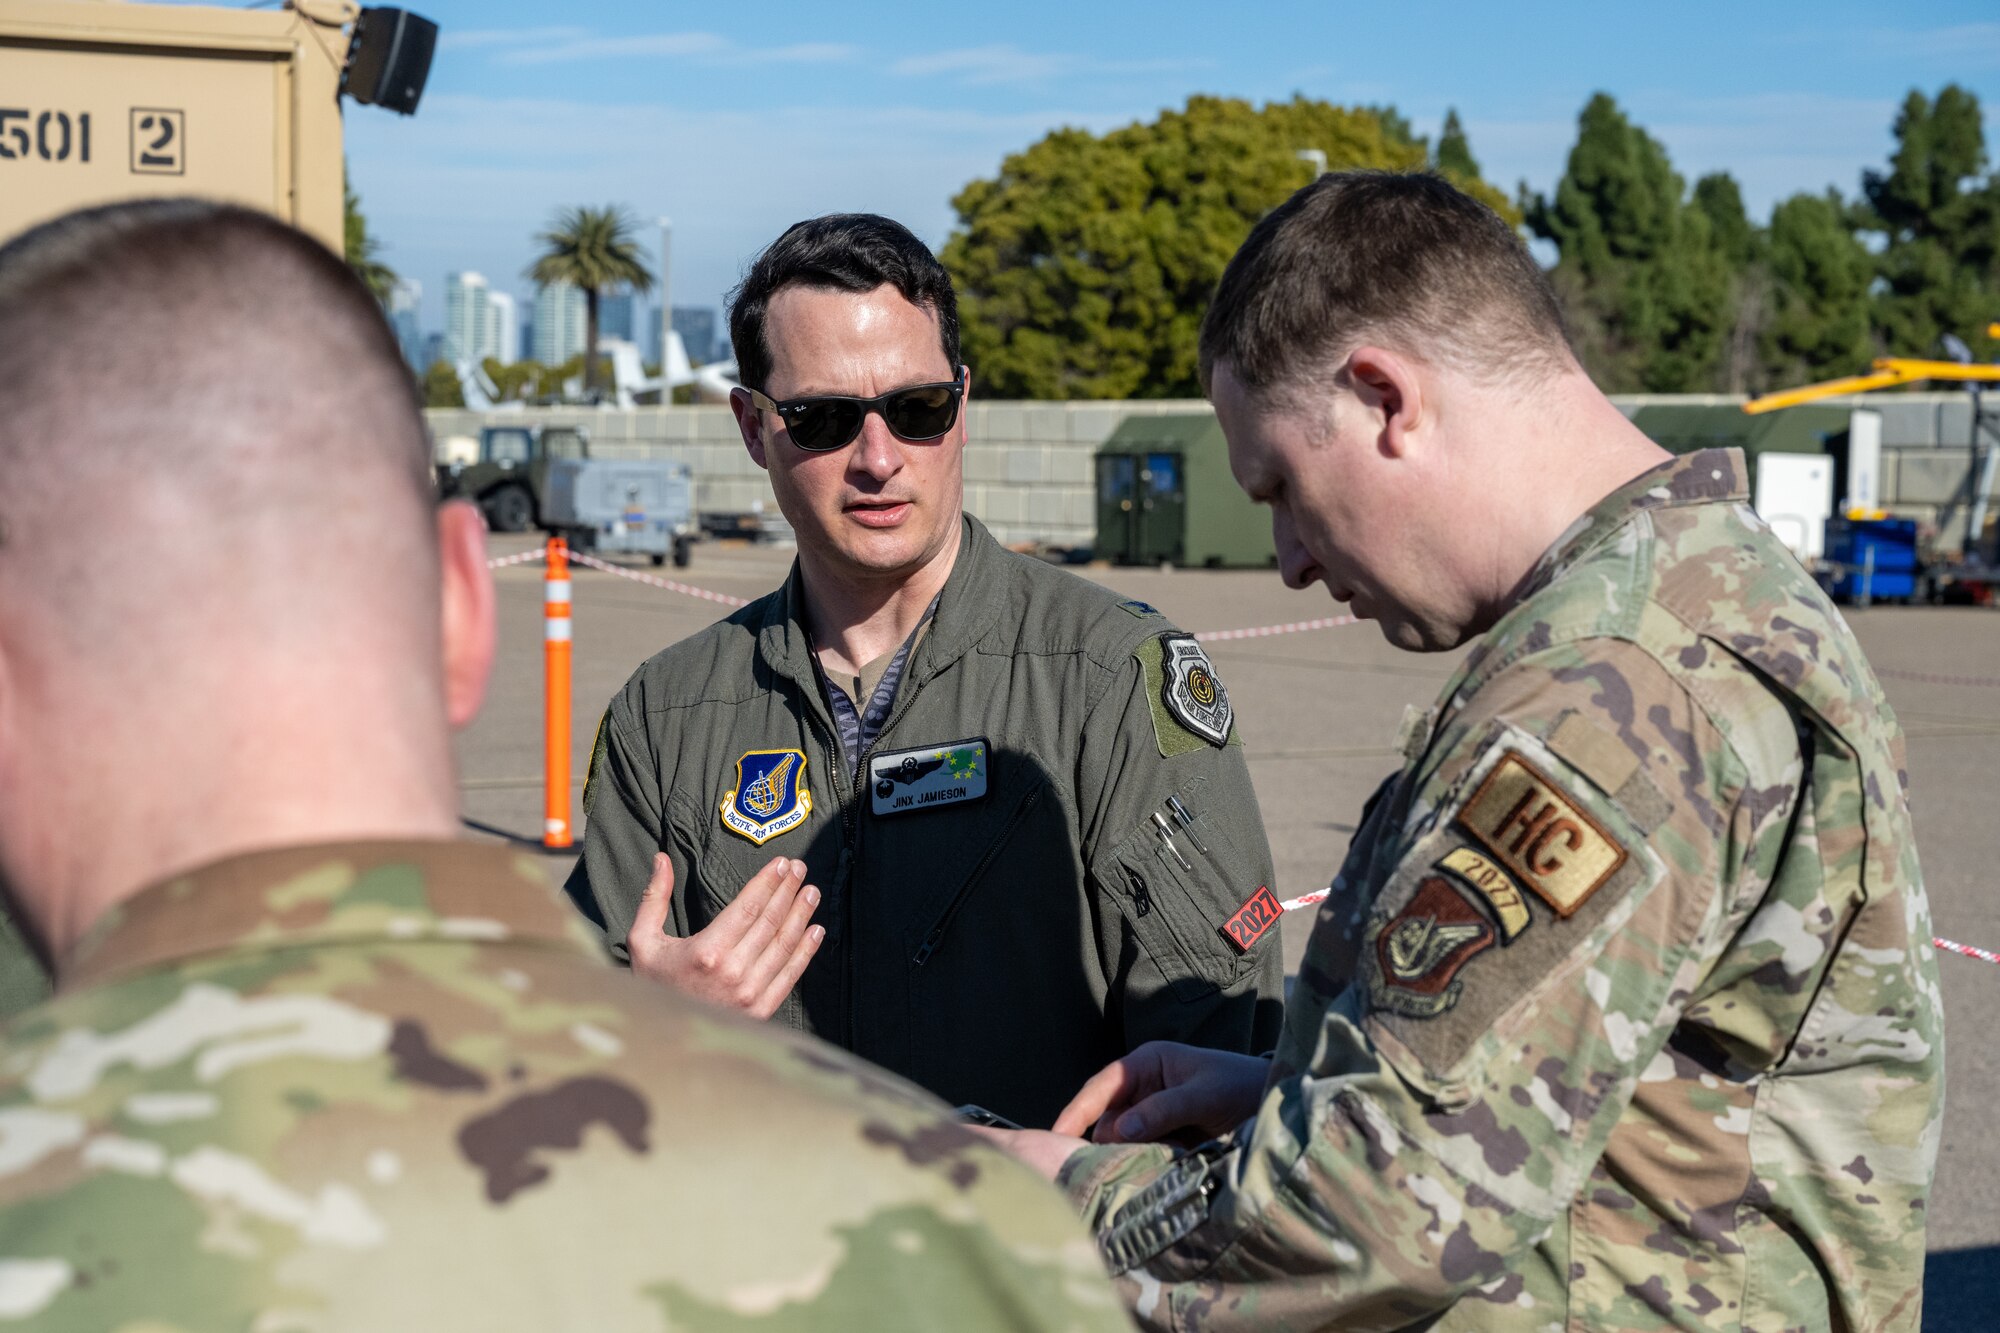 U.S. Air Force Col. Kevin Jamieson (middle), 3rd Air Expeditionary Wing commander, out of Joint Base Elmendorf-Richardson, Alaska, speaks with Airmen during a site visit during Exercise Bamboo Eagle 24-1 at spoke Naval Air Station North Island, California, Jan. 31, 2024.